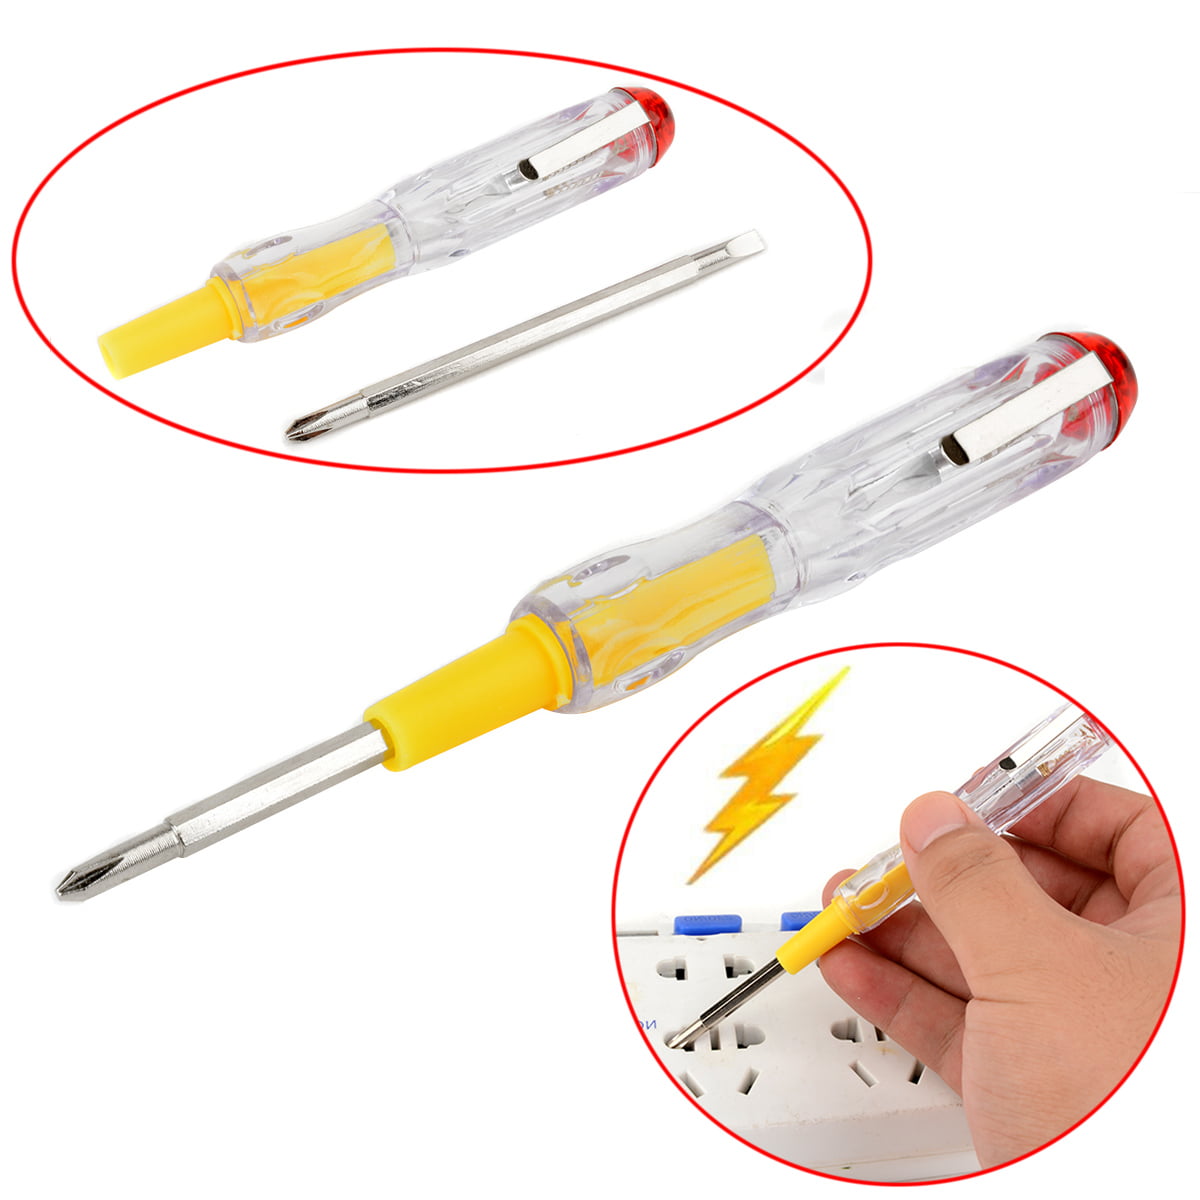 Various Screwdriver Electrical Tester Pen With Power Voltage Test Detector Probe 